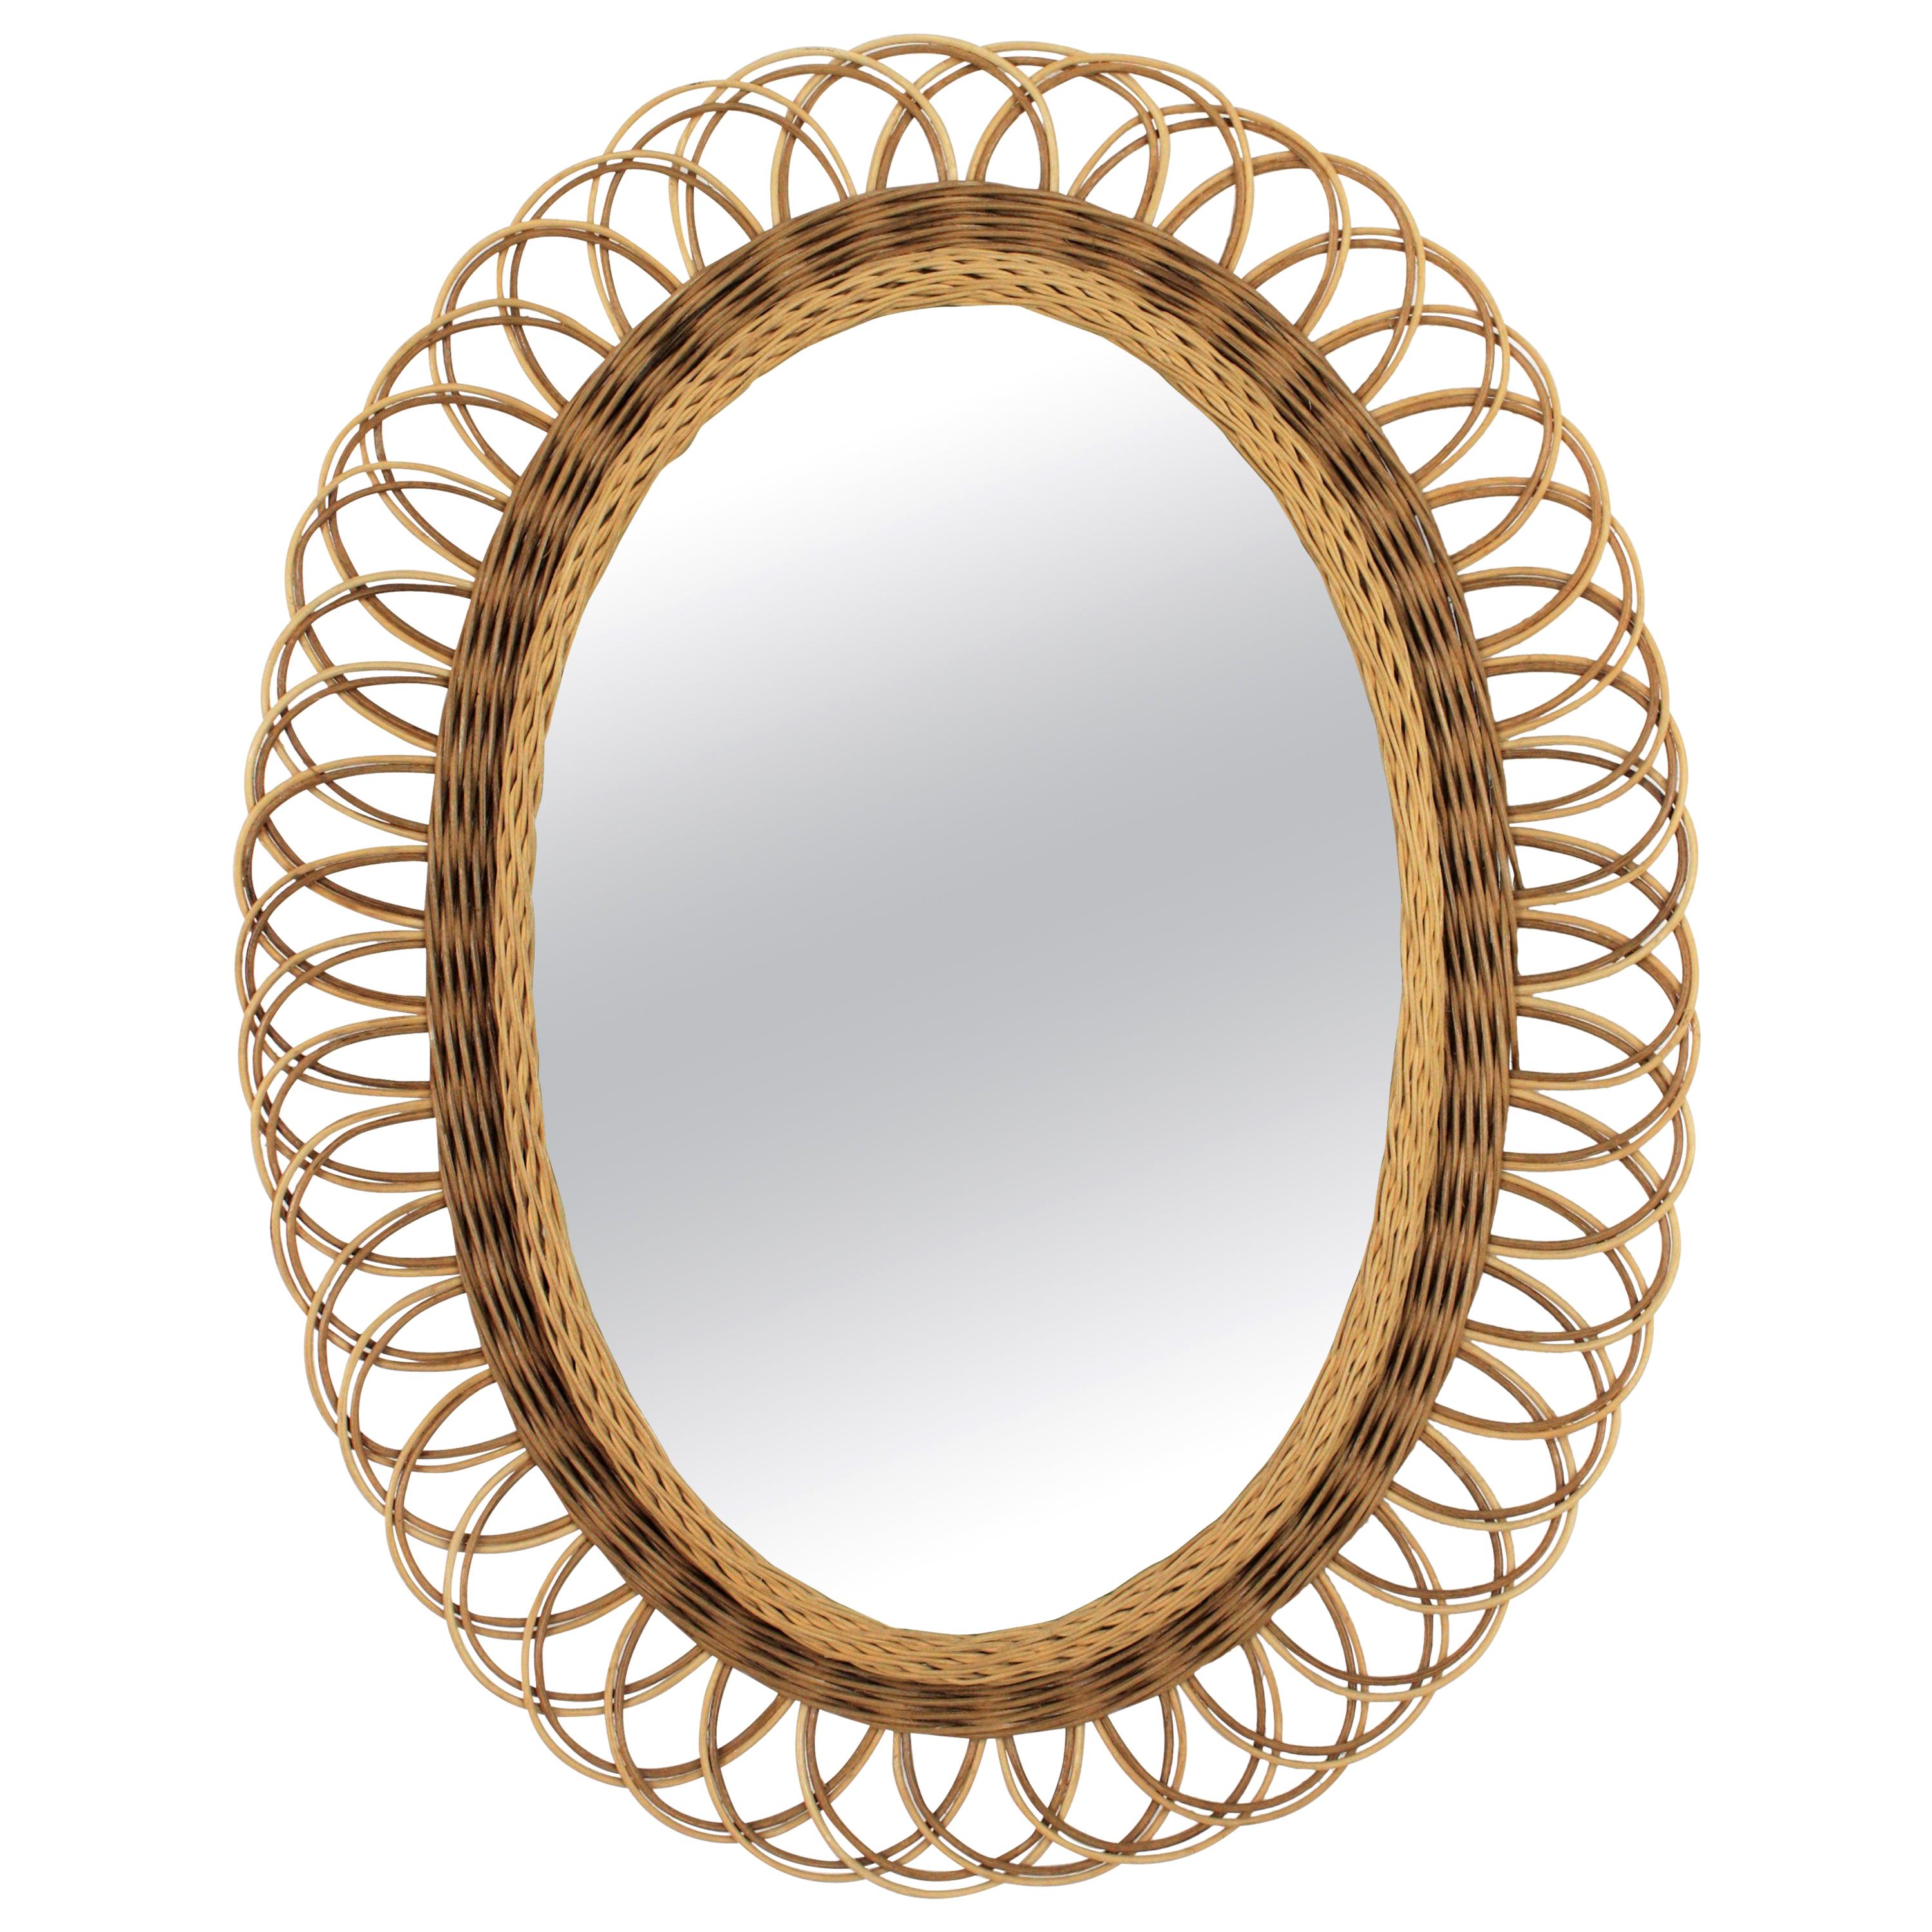 Mediterranean two-tone wicker rattan sunburst flower oval mirror, Spain, 1960s
This lovely oval mirror was handcrafted at the Mid-Century Modern Period and it has a beautiful two- tone wicker frame that makes it highly decorative.
Interesting to